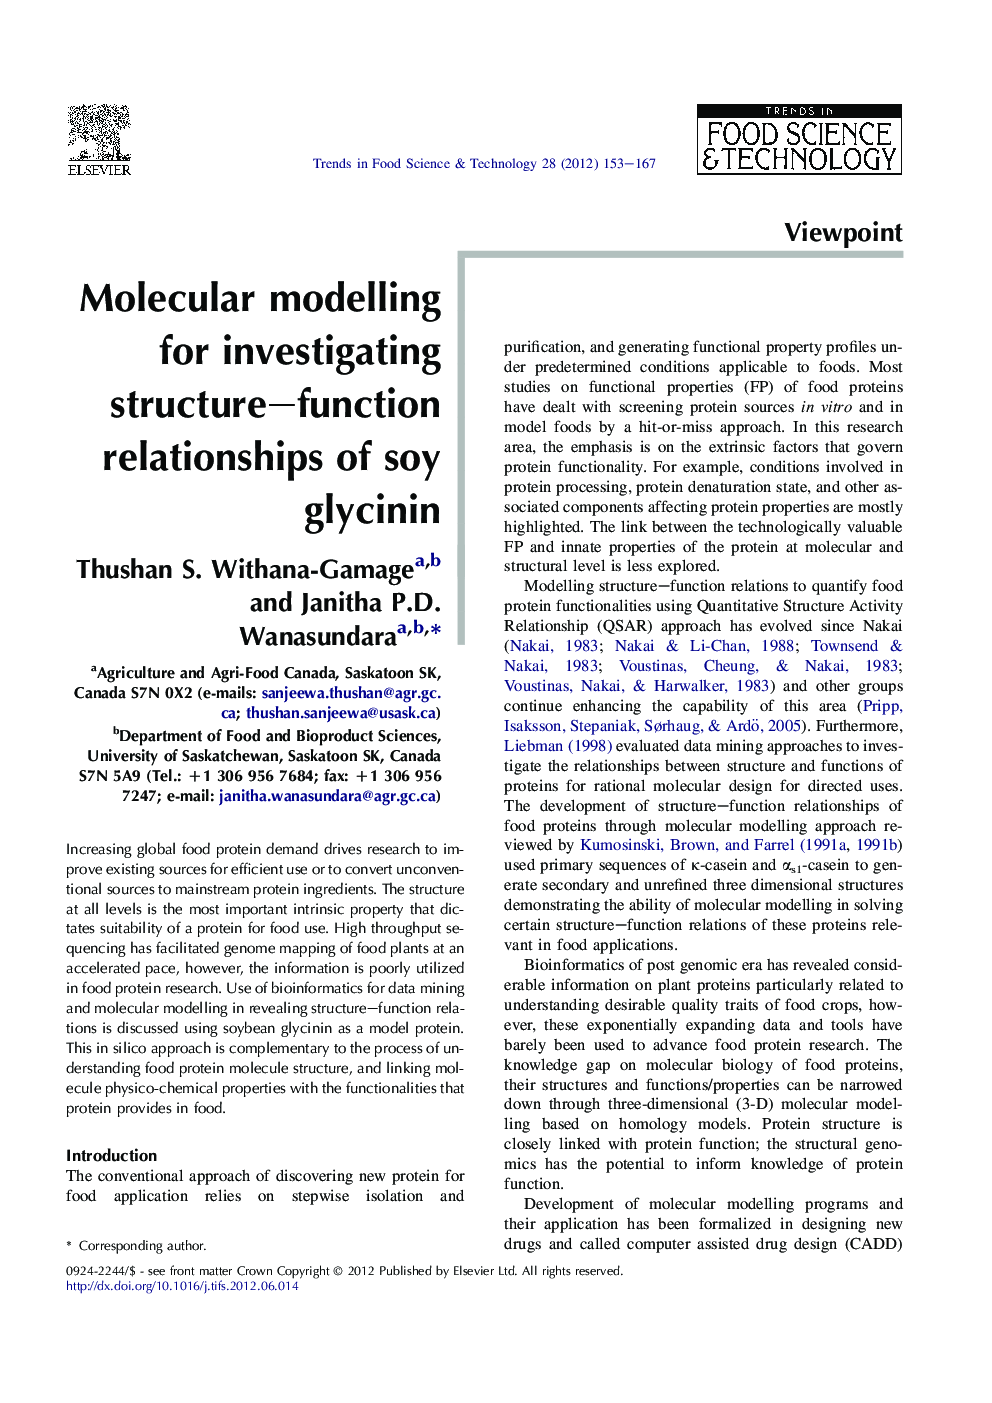 Molecular modelling for investigating structure–function relationships of soy glycinin